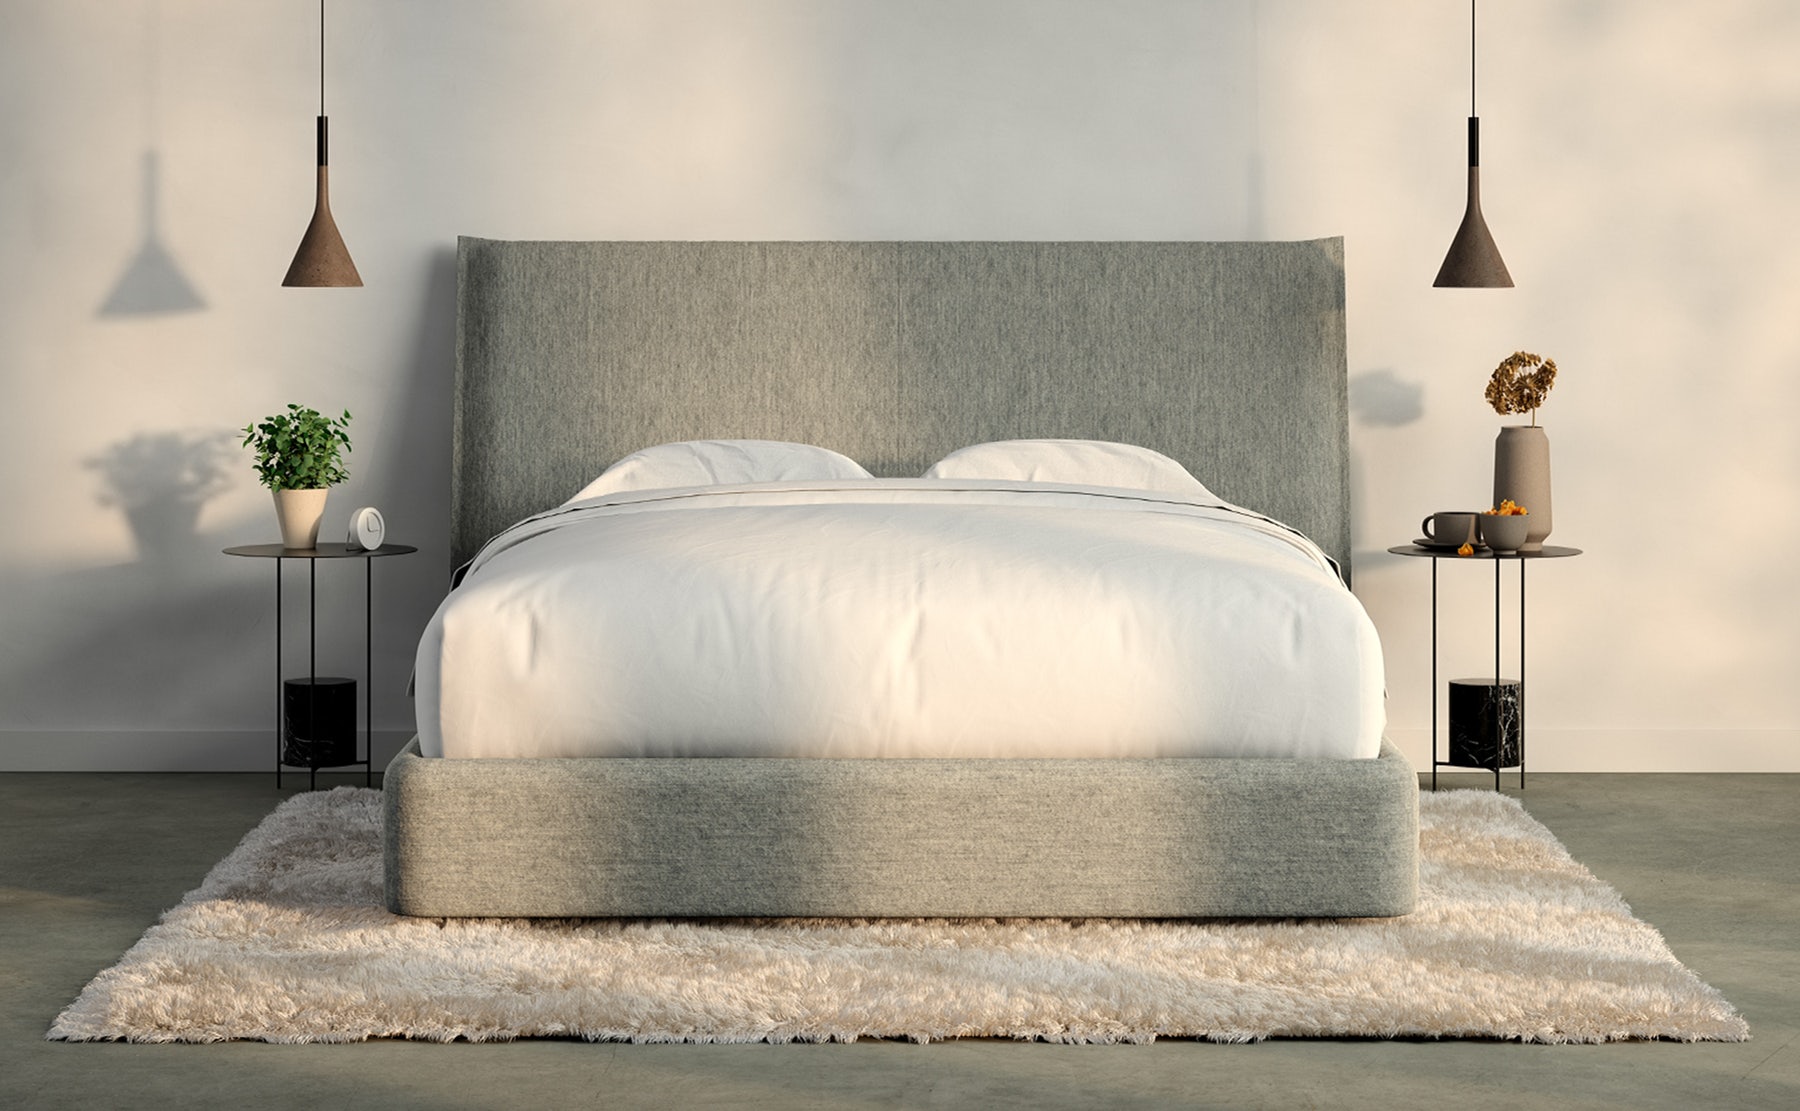 Mattress Sizes And Bed Dimensions Guide, Biggest King Size Bed